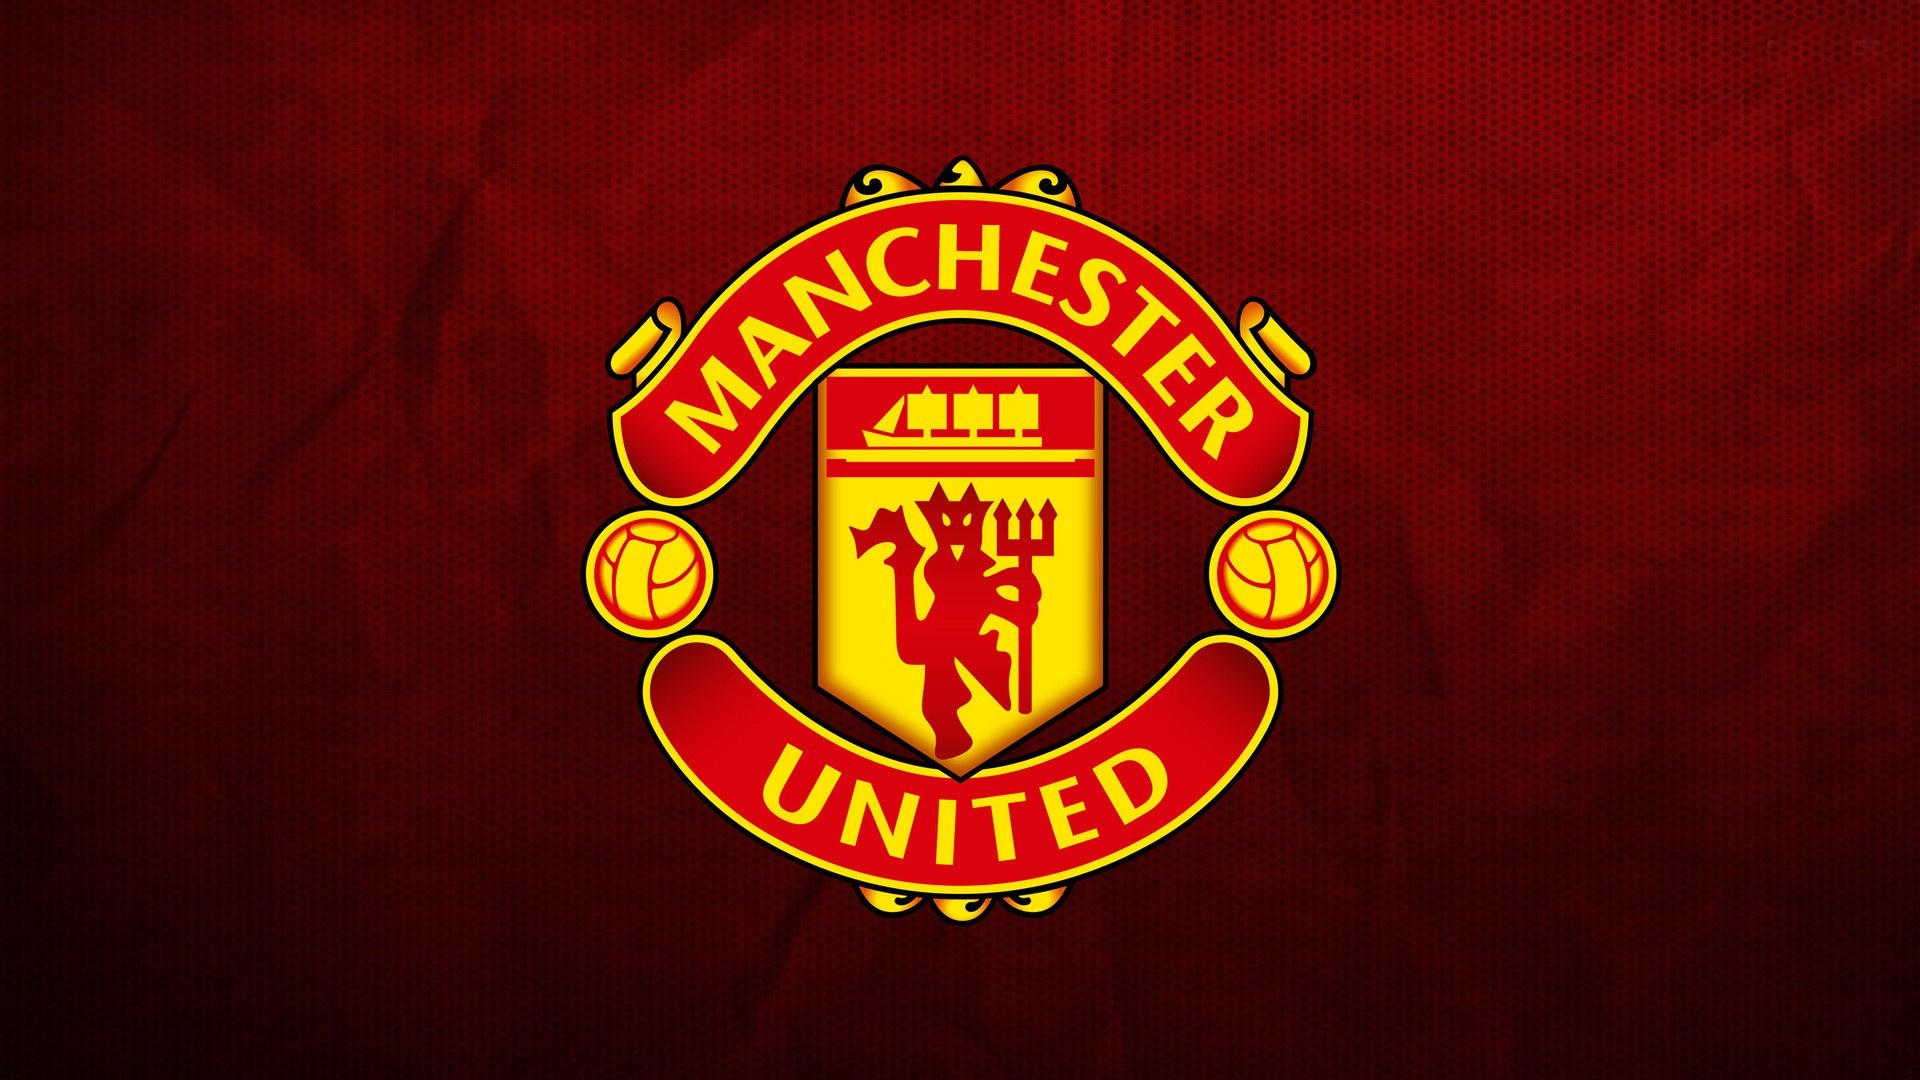 Manchester United: The team beat rivals Liverpool to win the 1983 Charity Shield. 1920x1080 Full HD Wallpaper.